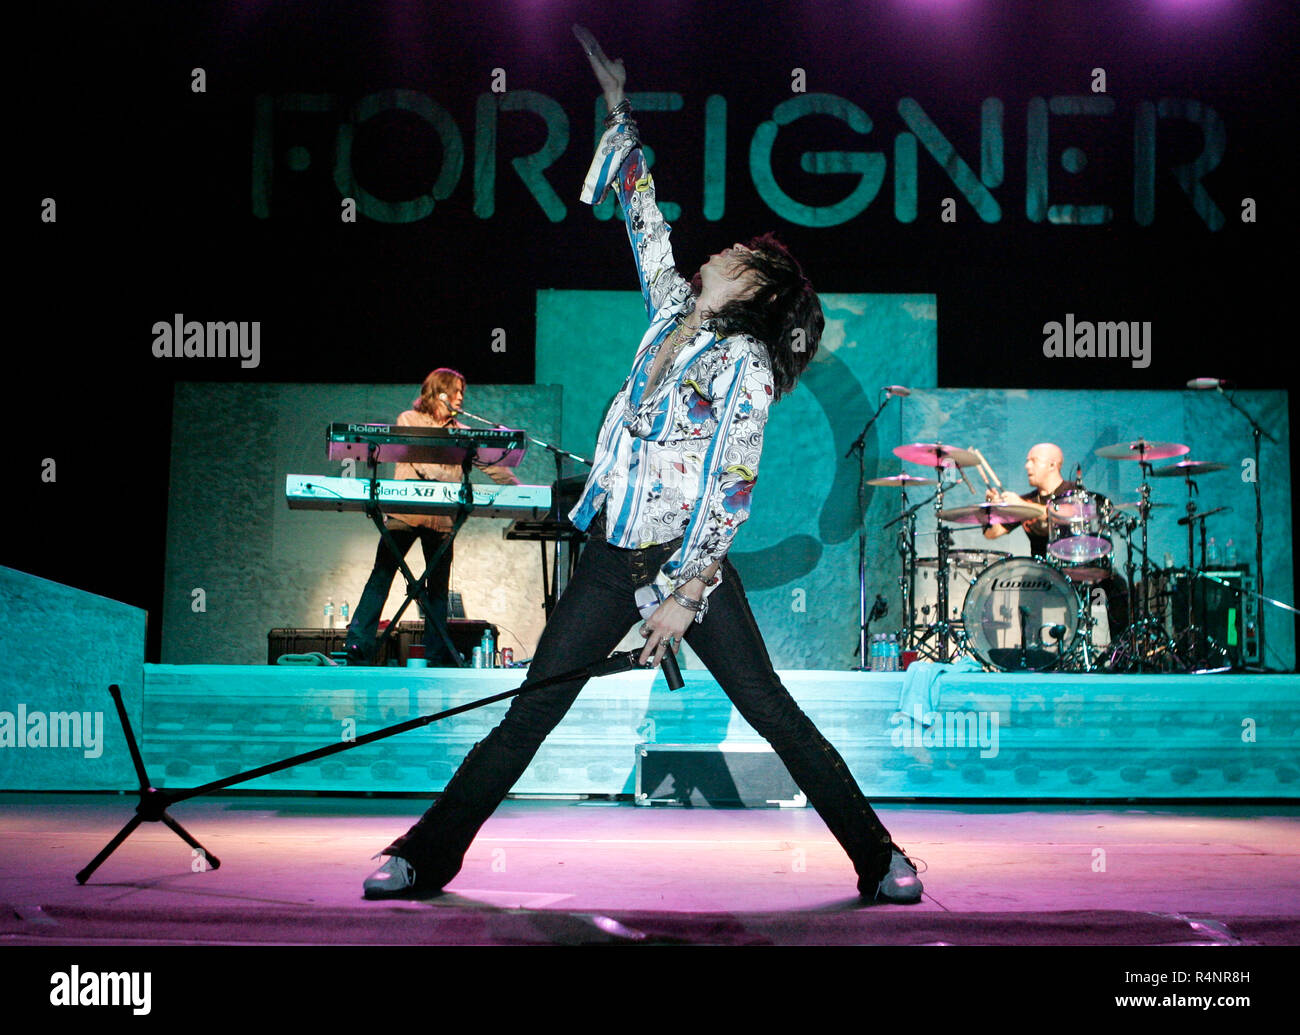 Kelly Hansen with Foreigner performs in concert at the Mizner Park Amphitheatre in Boca Raton, Florida on December 29, 2007. Stock Photo